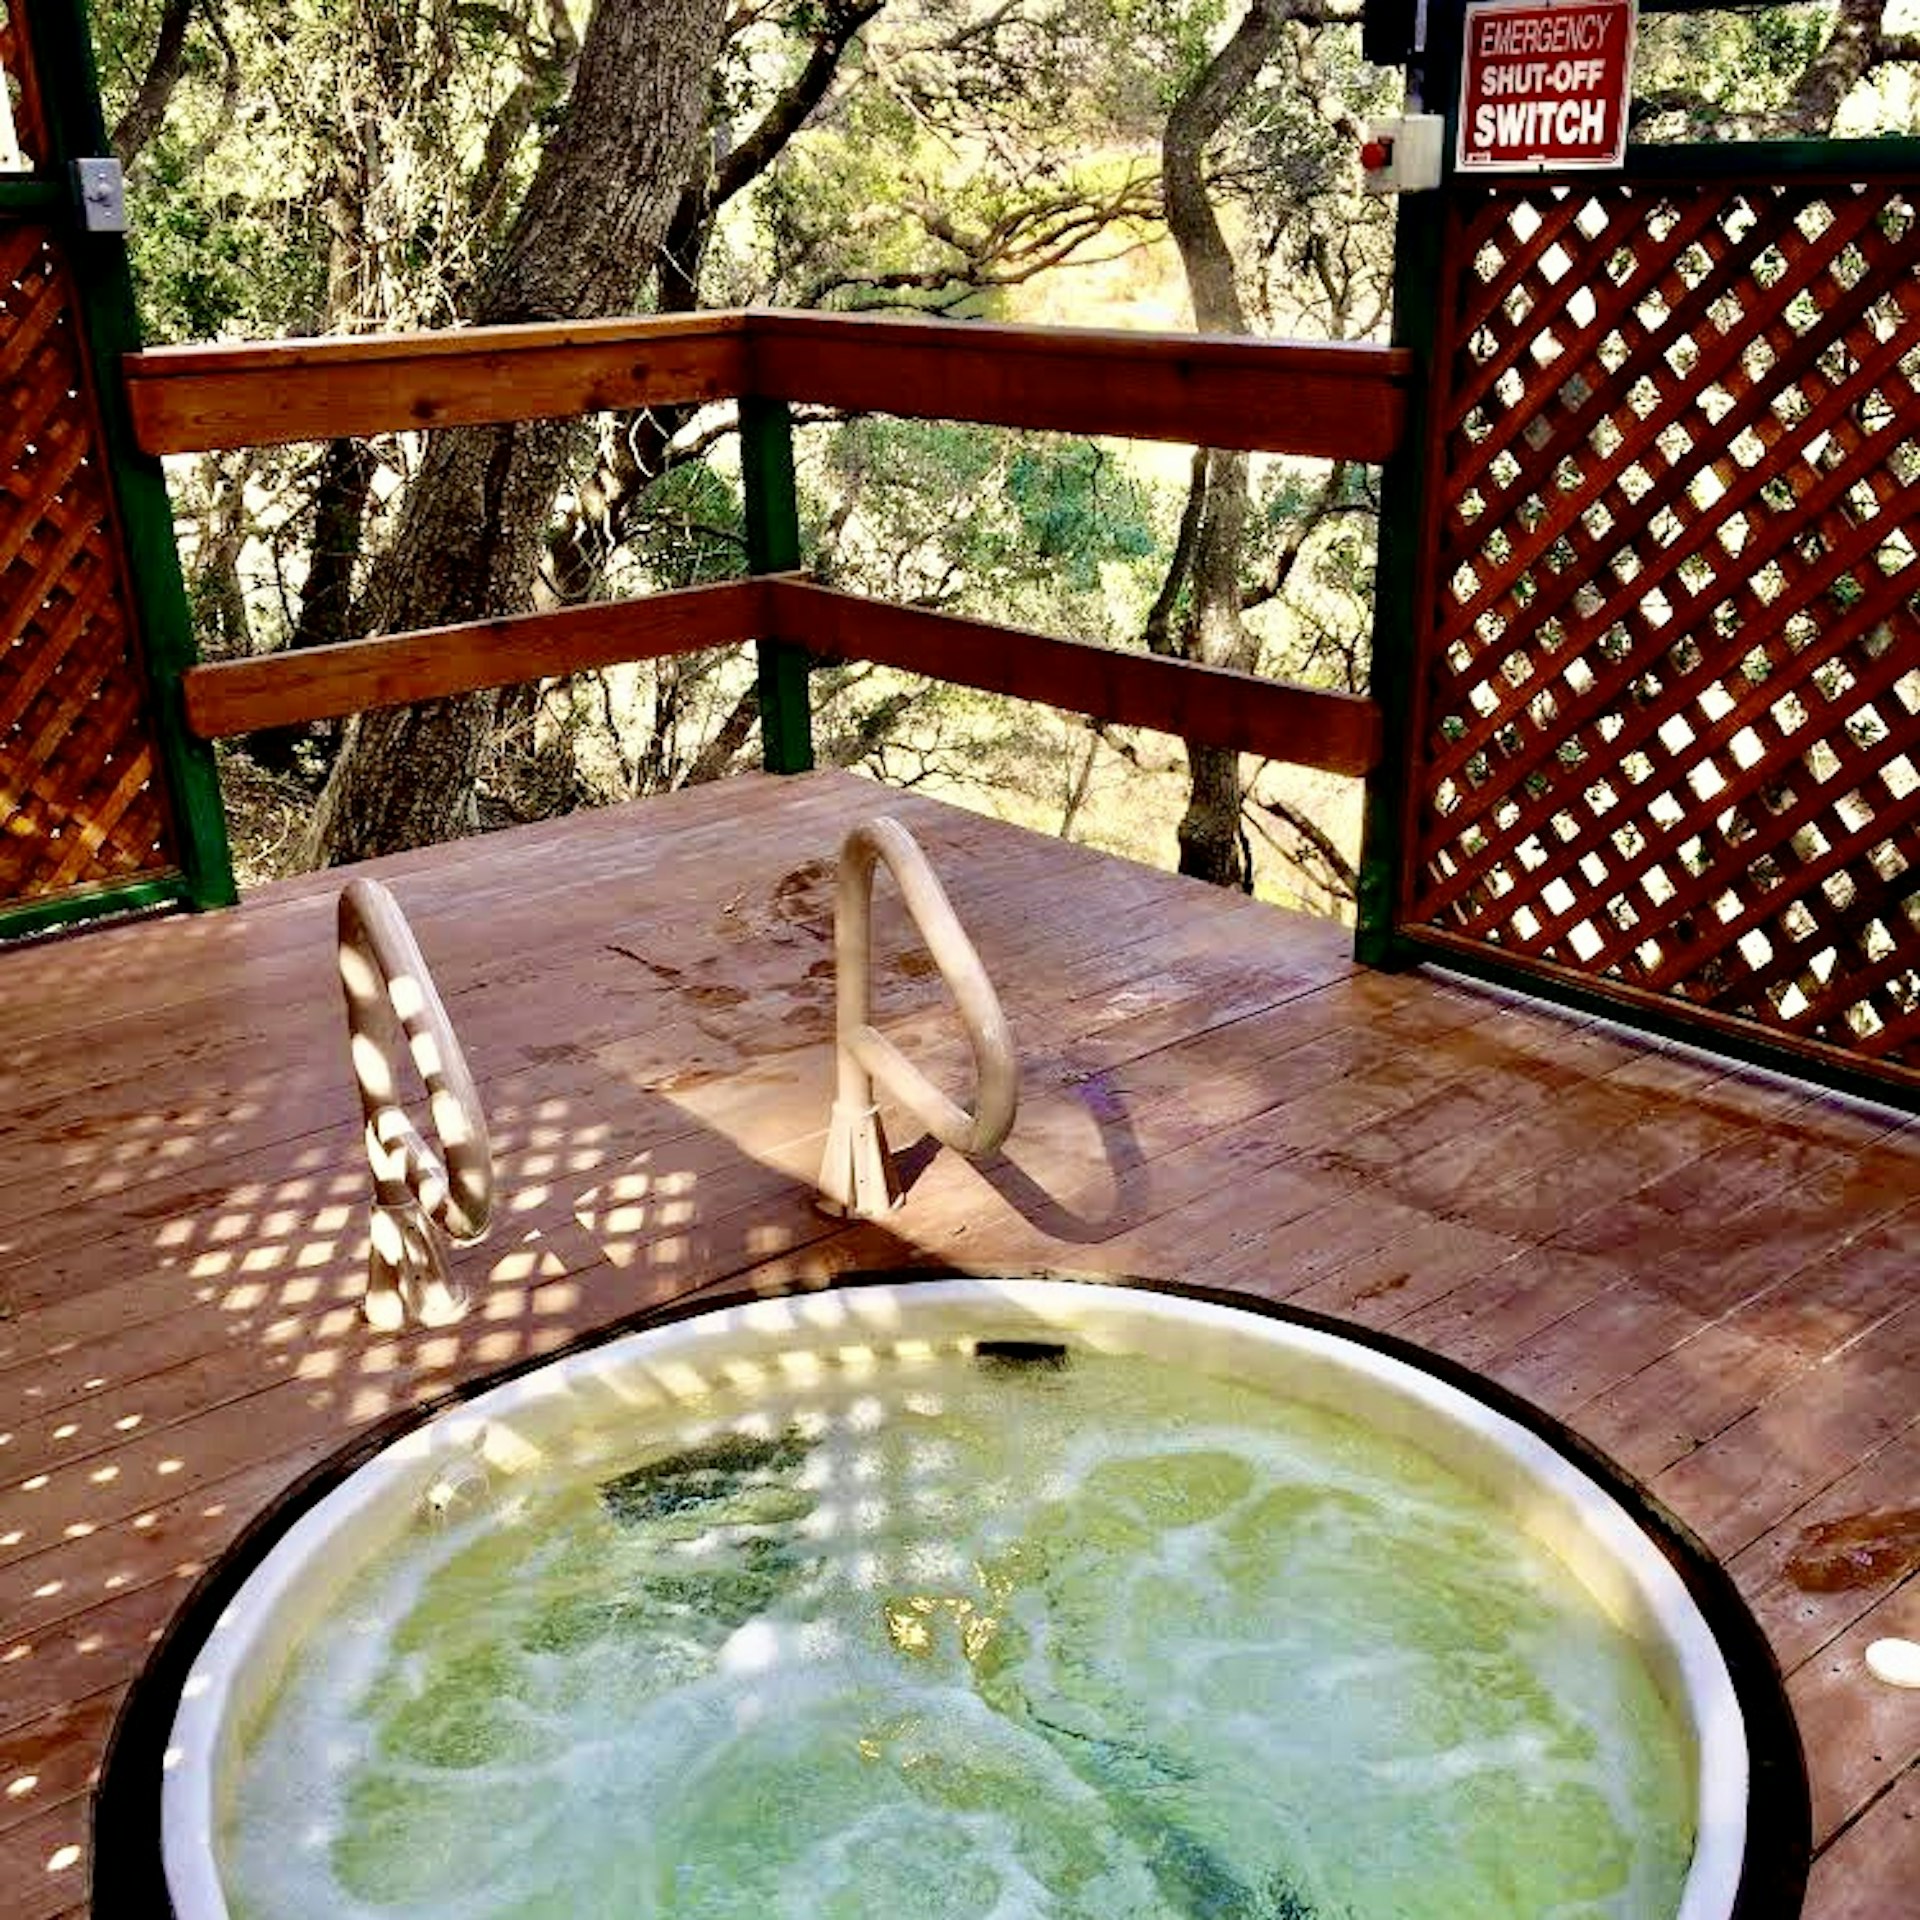 A bubbling hot tub with trees in the background